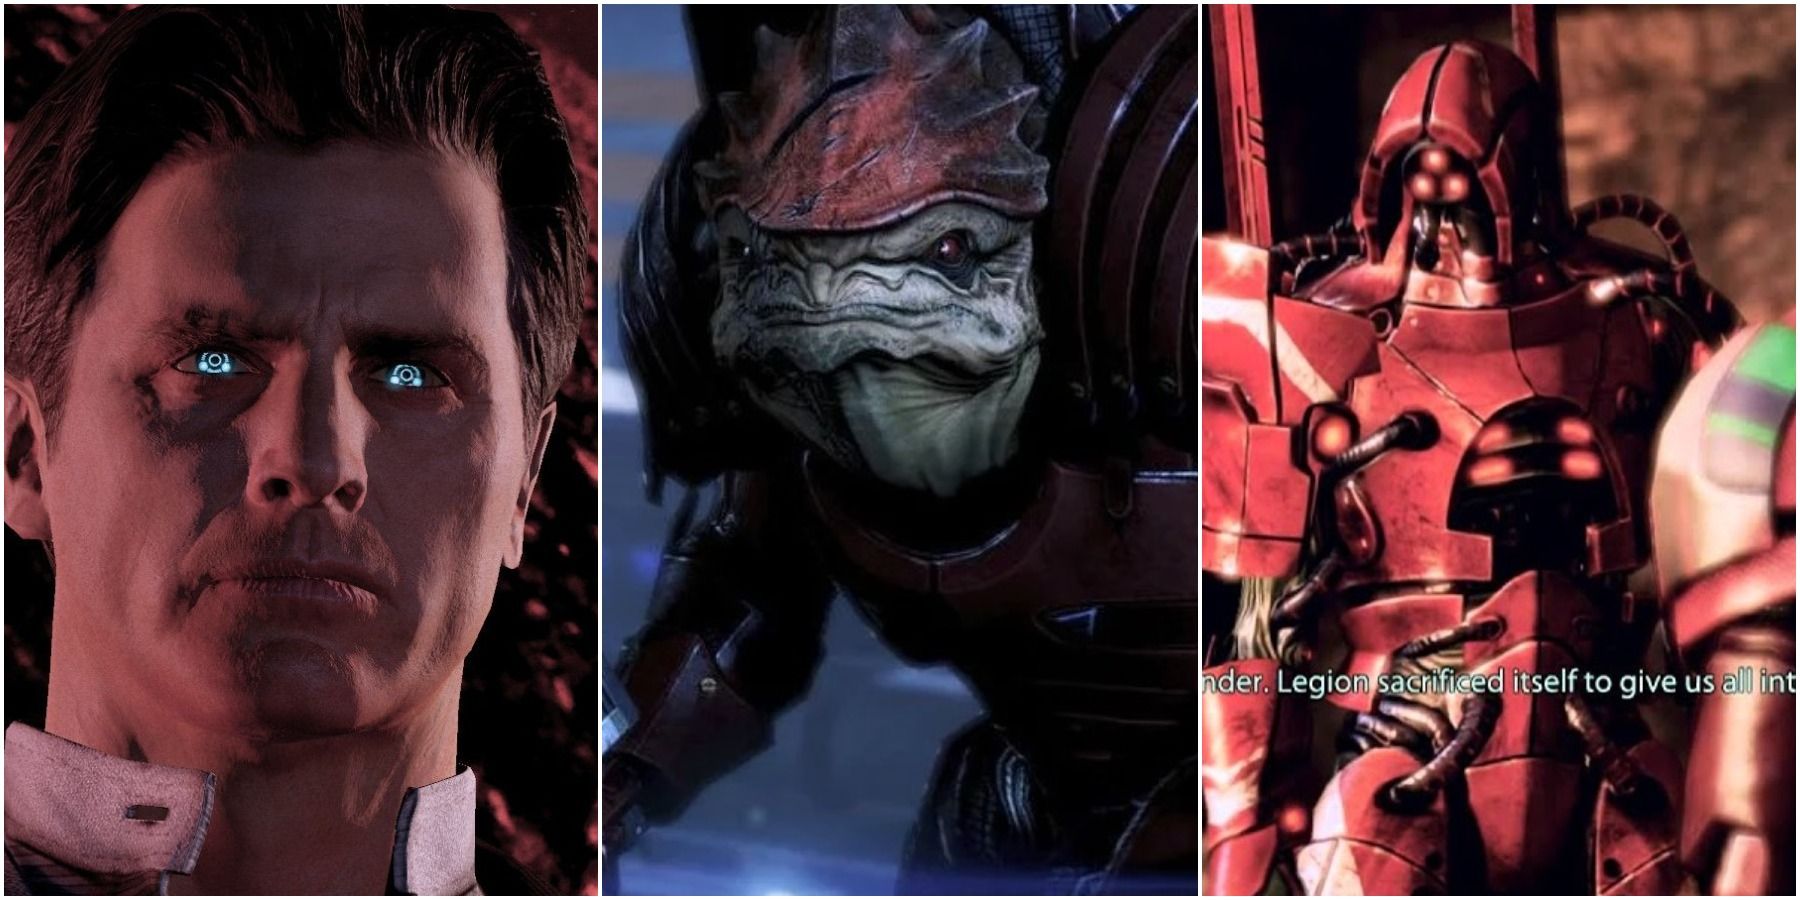 Making the right choices with The Illusive Man, Wrex and the Geth are required for the best ending to Mass Effect 3